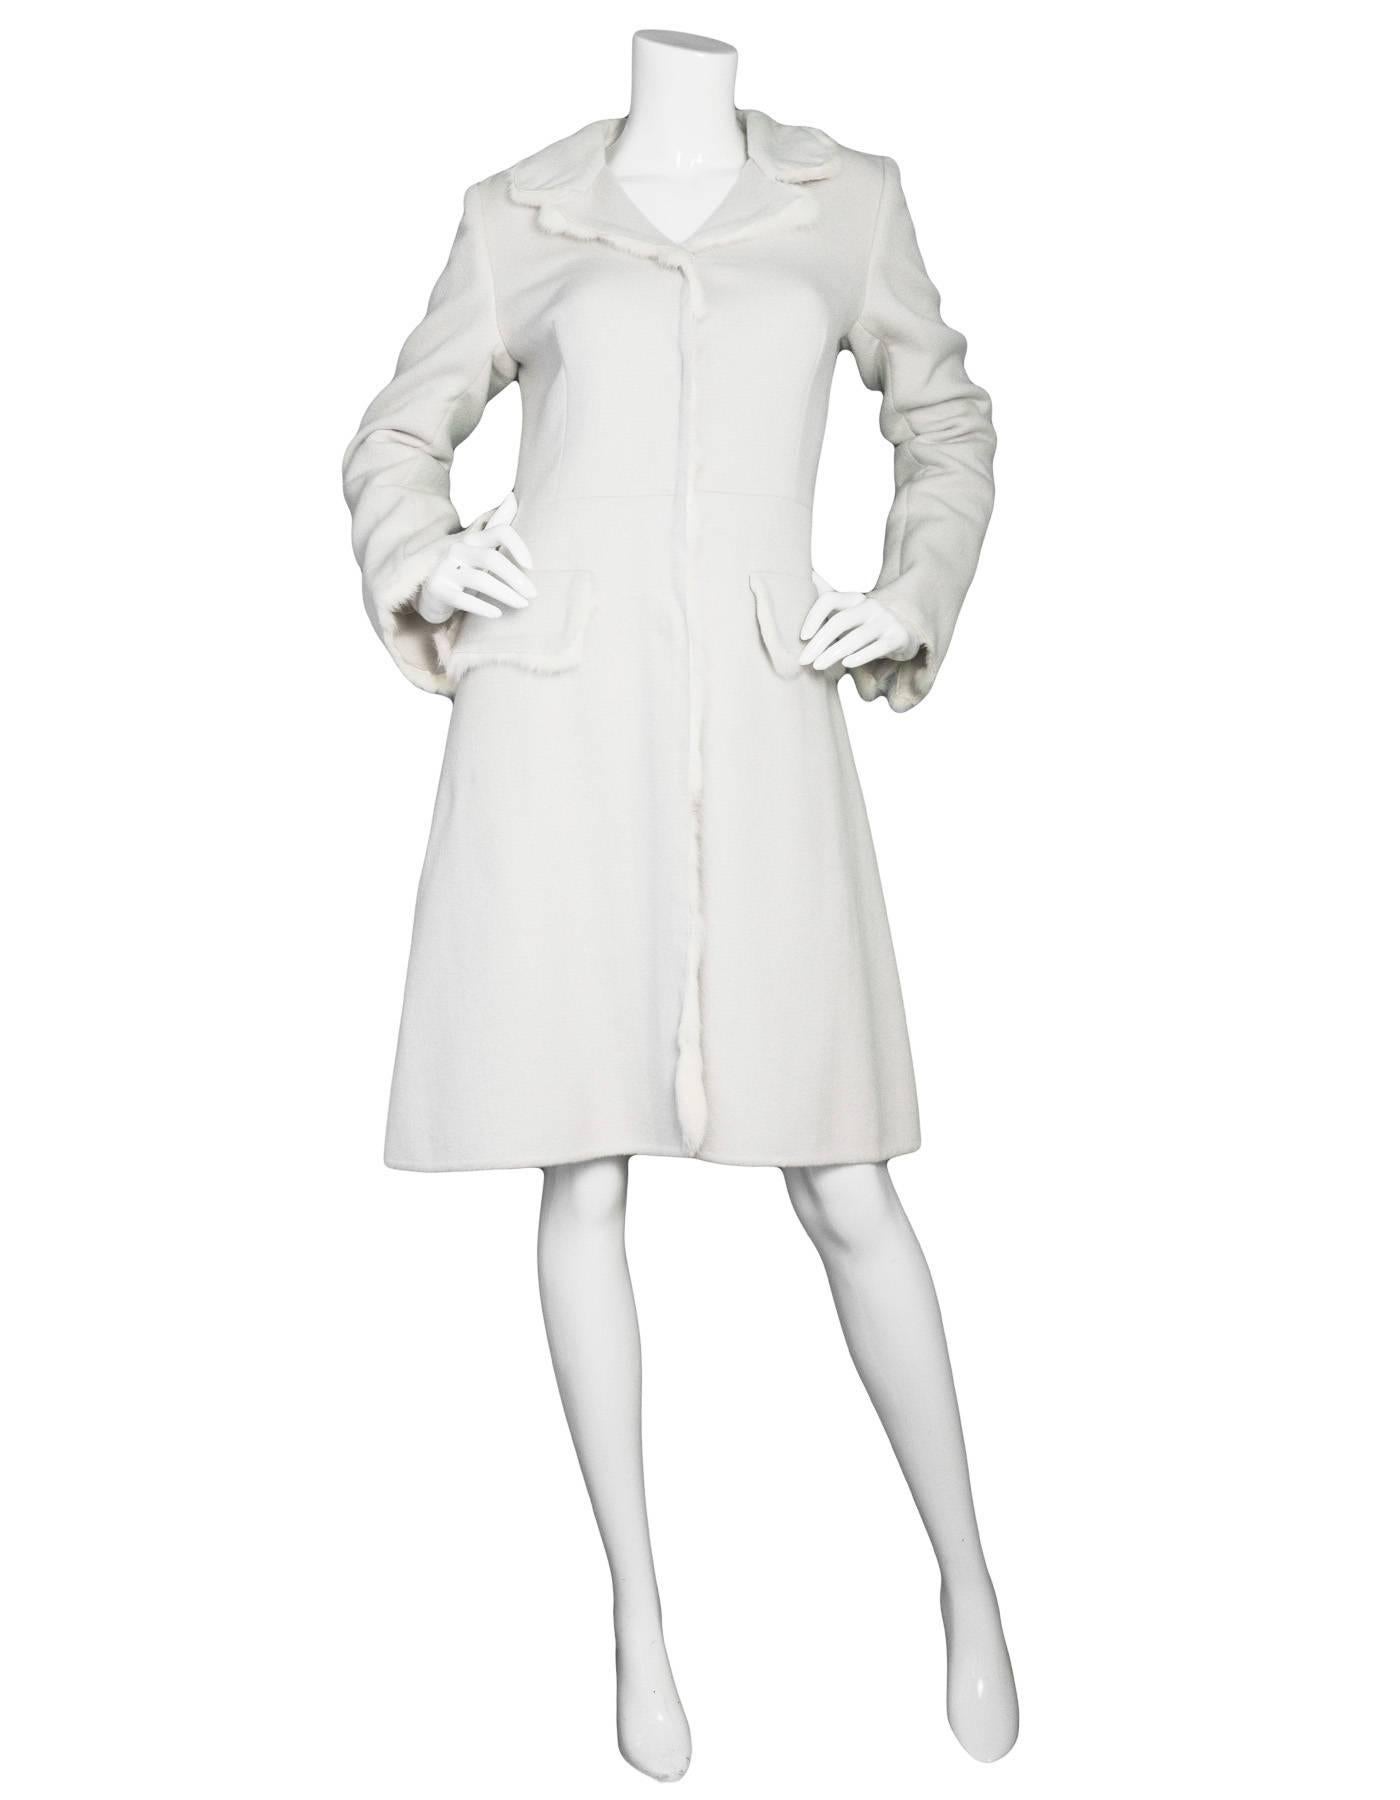 Prada Off-White Cashmere & Fur Coat
Features off-white fur trim throughout

Made In: Italy
Color: Off-white
Composition: 52% wool, 48% angora
Lining: None
Closure/Opening: Button down front
Exterior Pockets: Two hip flap pockets
Interior Pockets: